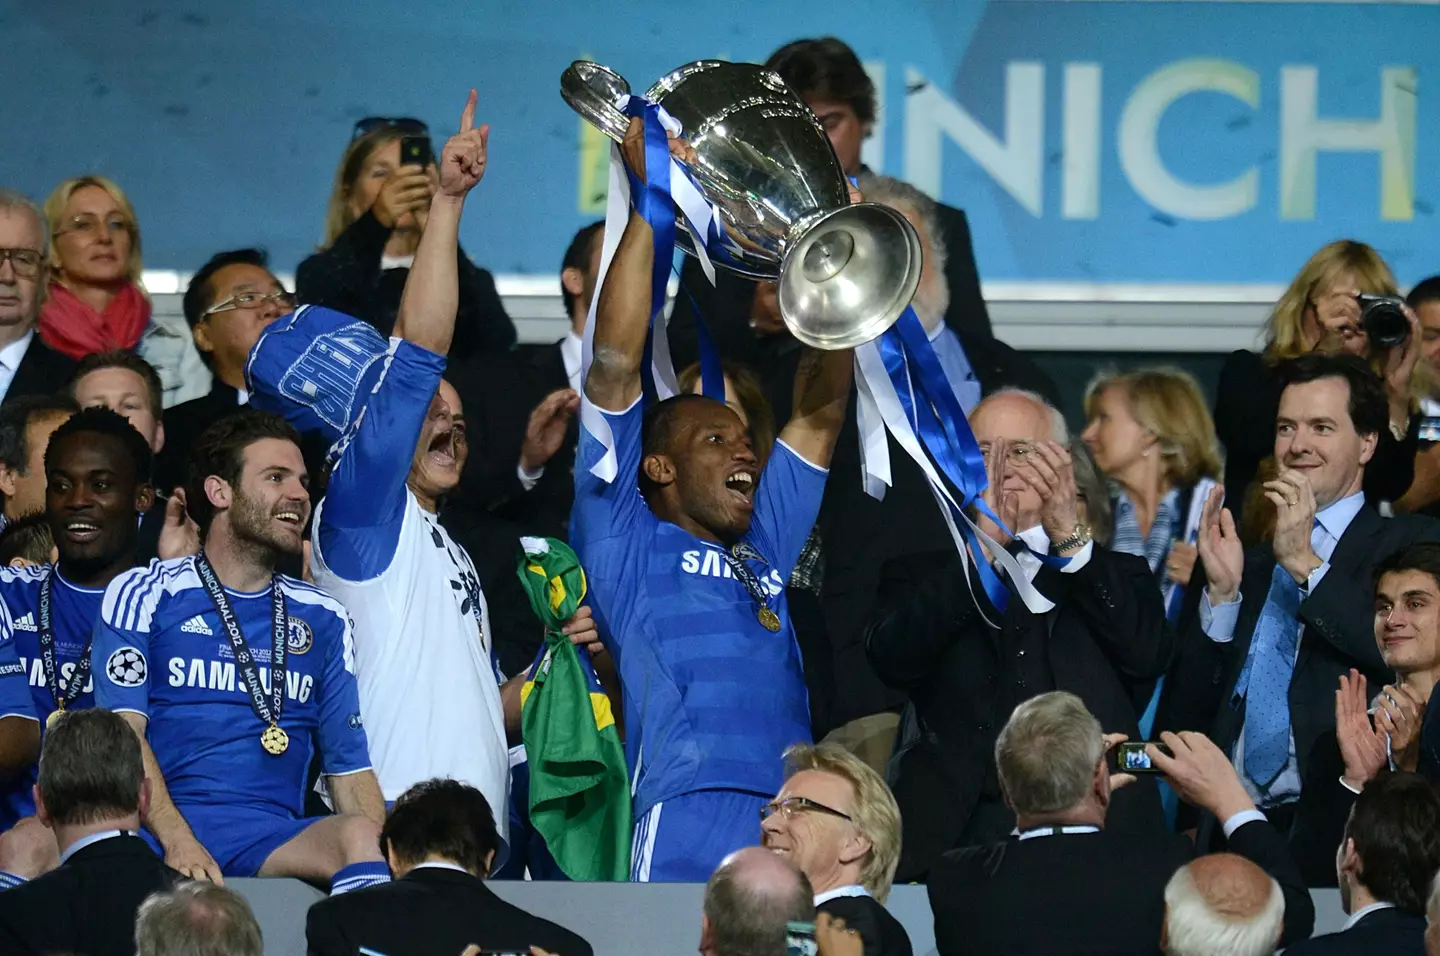 Drogba lifts the Champions League trophy in Munich (Image: PA)